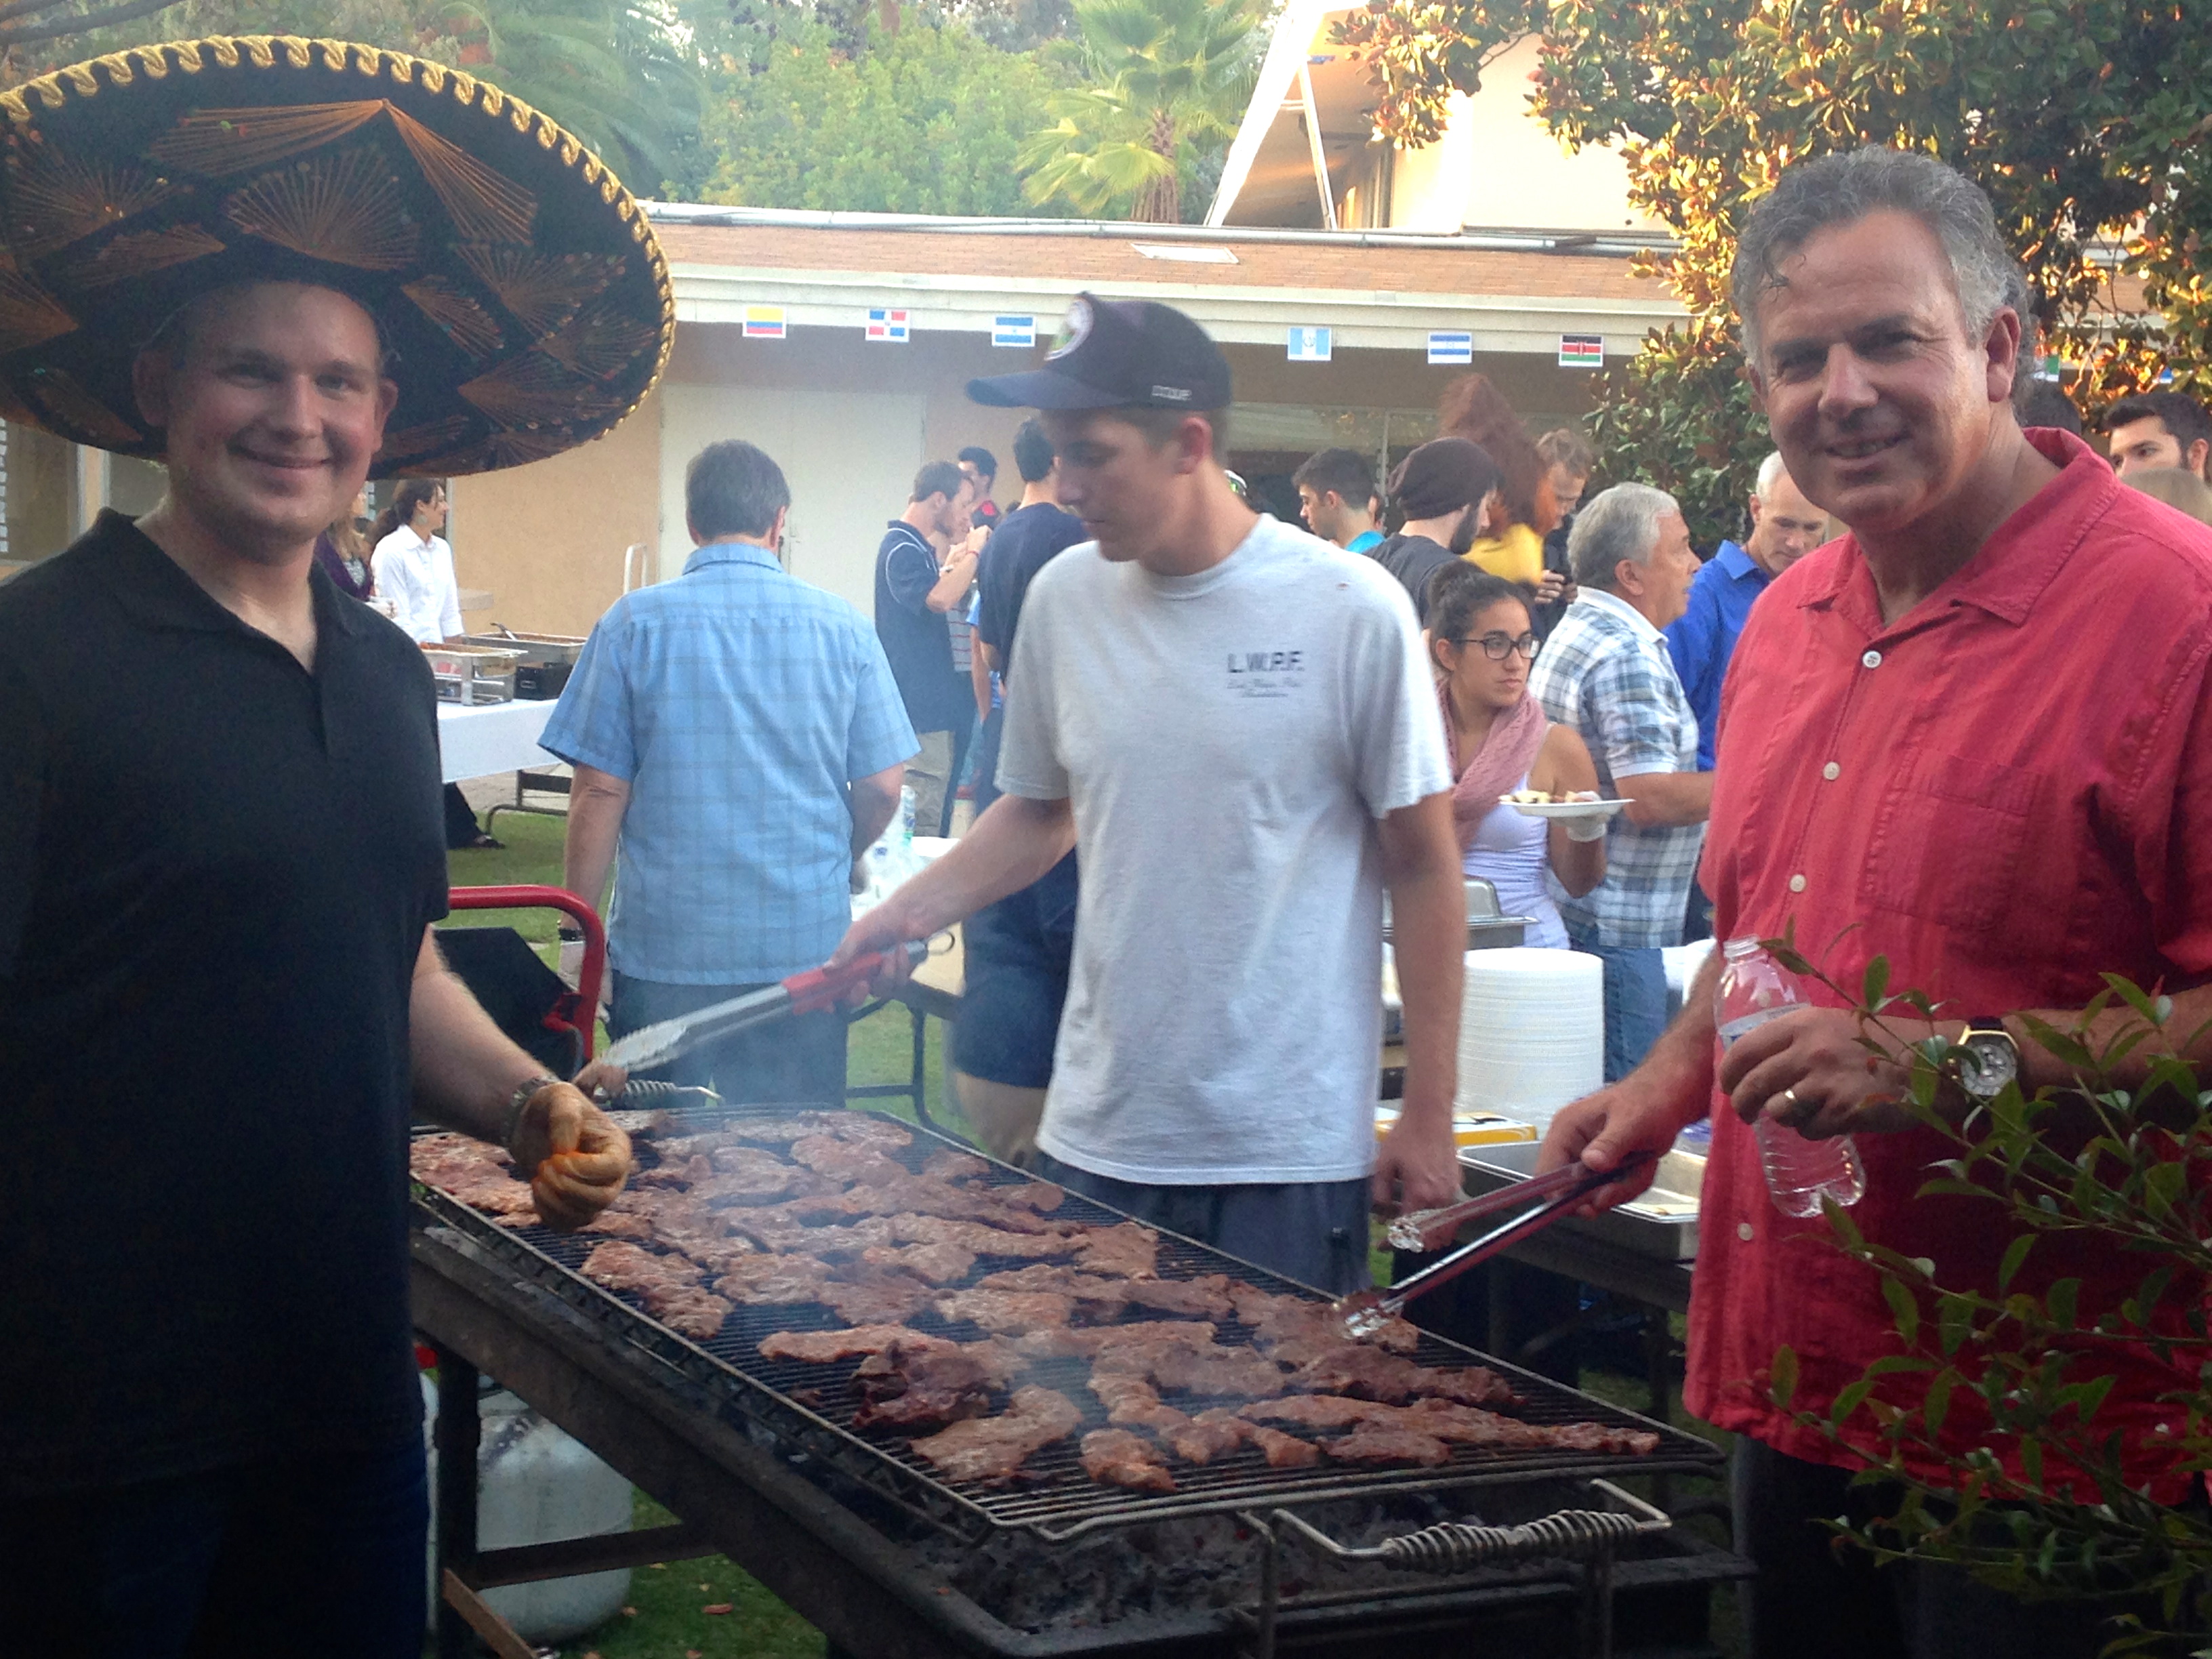 David Jr. & Dave cooking Carne Asada for the dinner at SDCC's missions fair